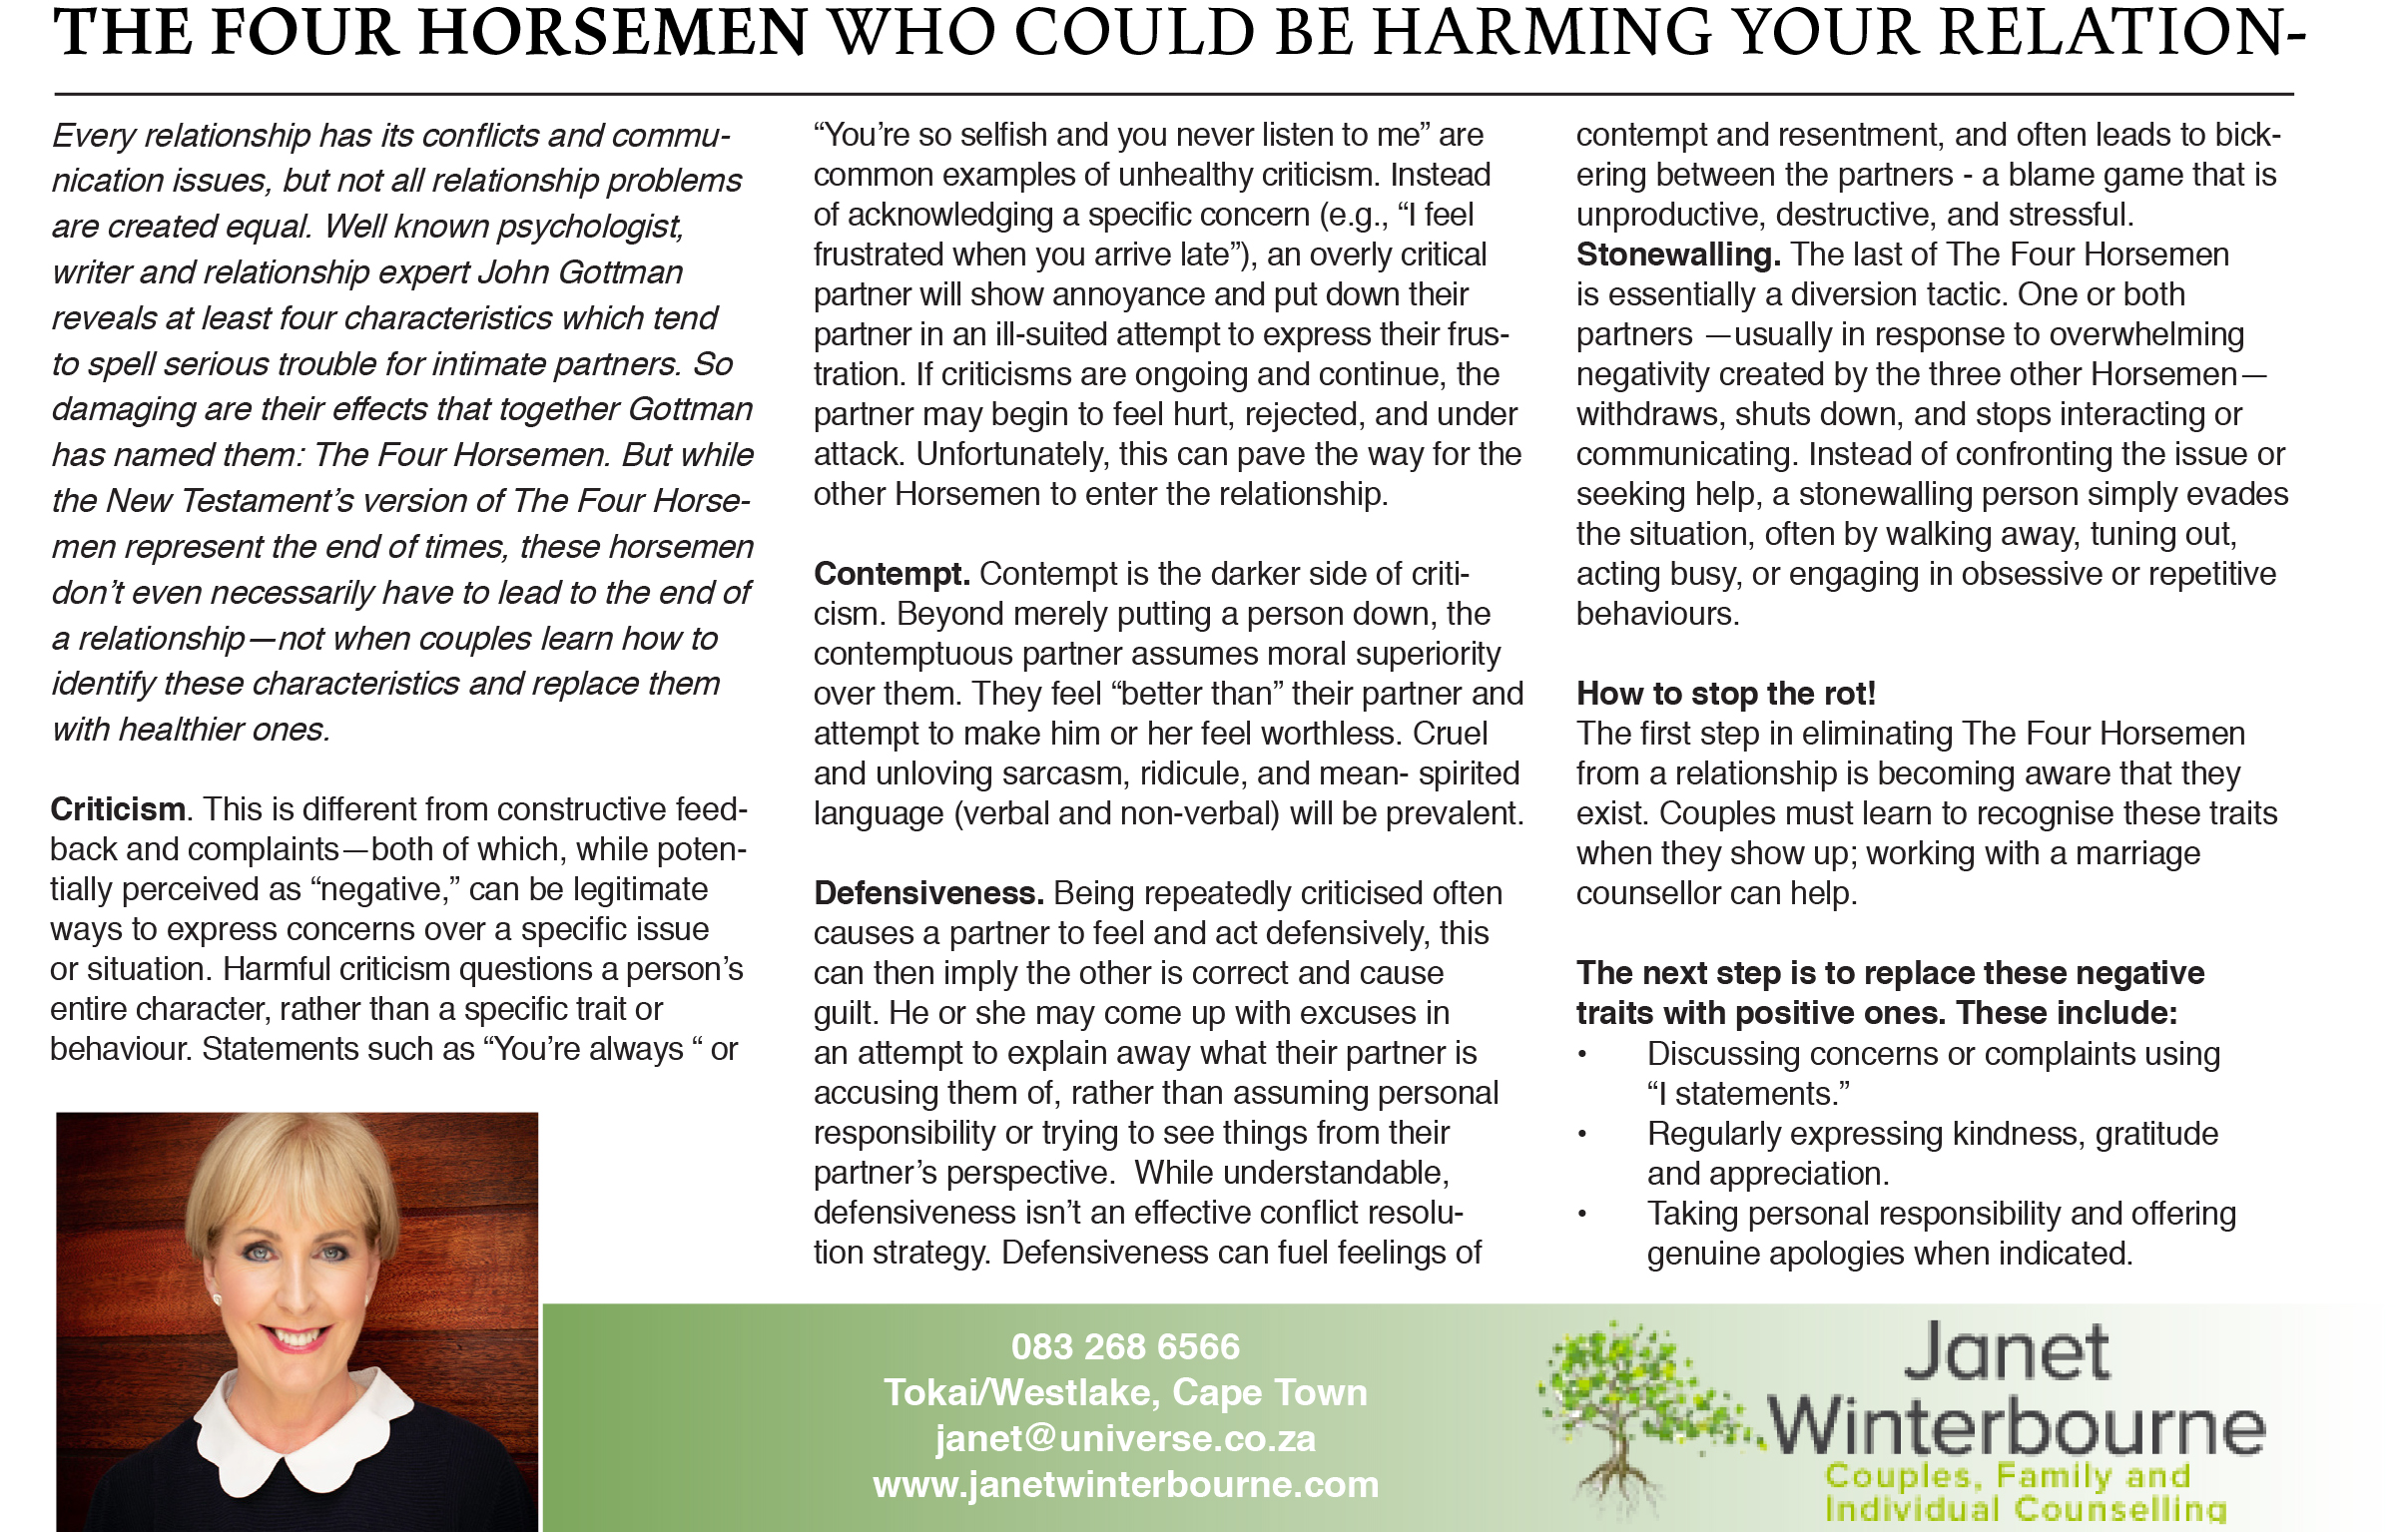 THE FOUR HORSEMEN WHO COULD BE HARMING YOUR RELATIONSHIP | Psychologist Cape Town